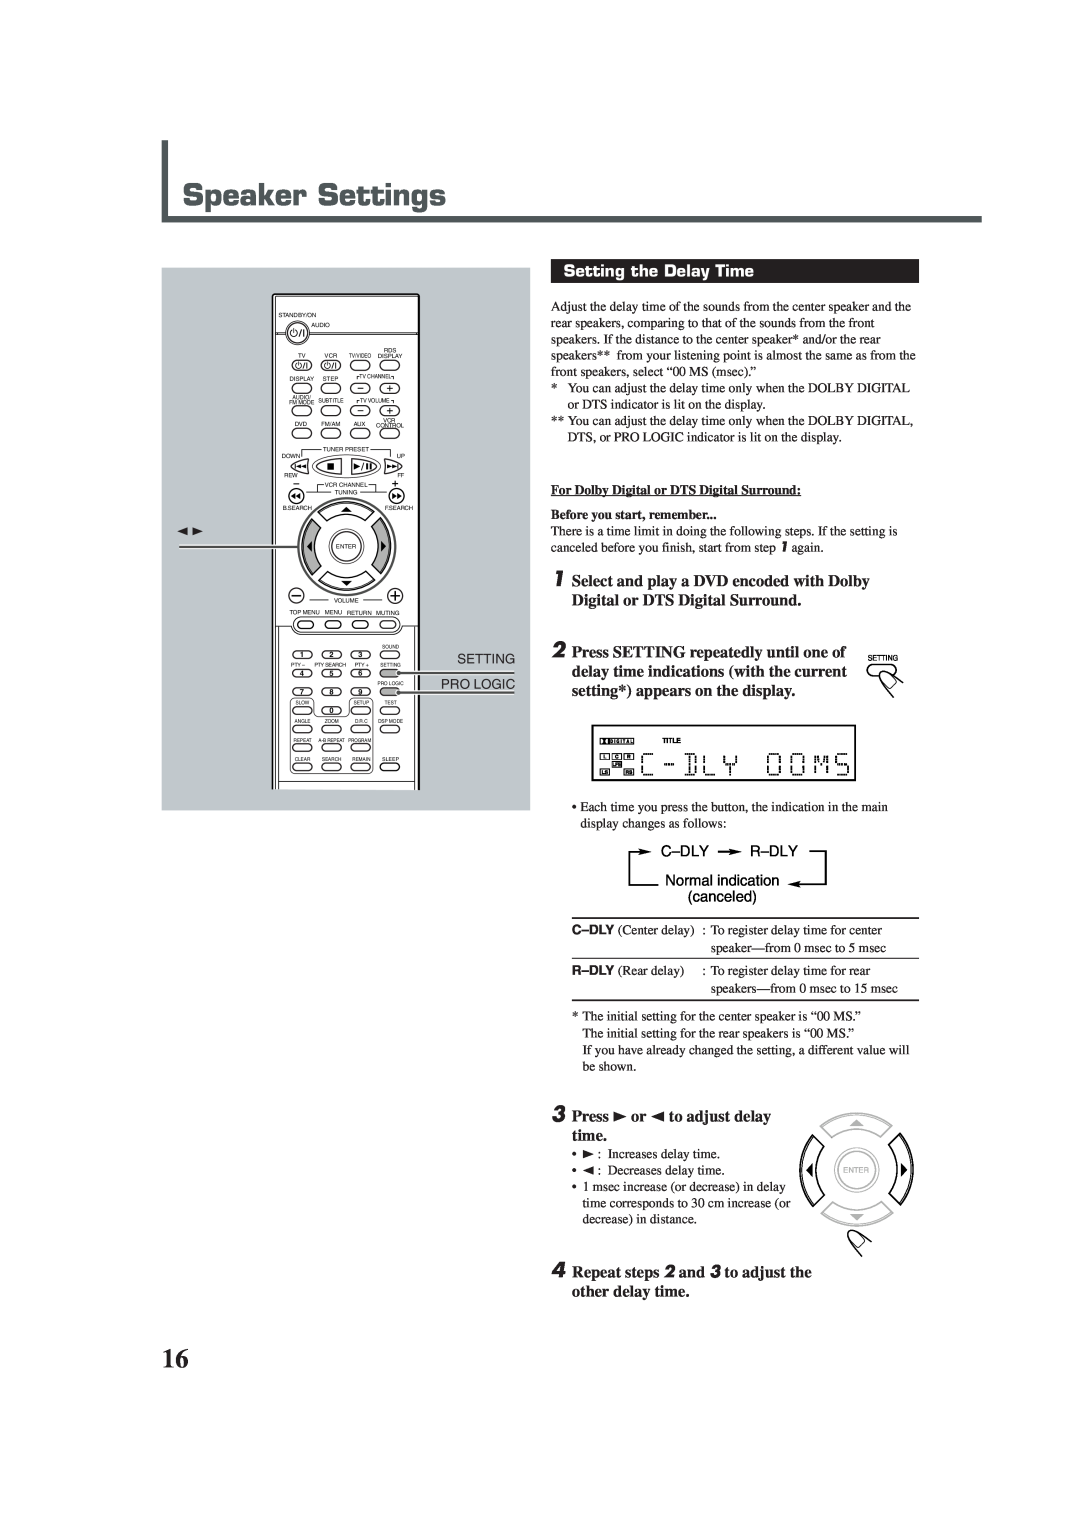 JVC TH-A30R Speaker Settings, Setting the Delay Time, setting* appears on the display, Press 3 or 2 to adjust delay time 